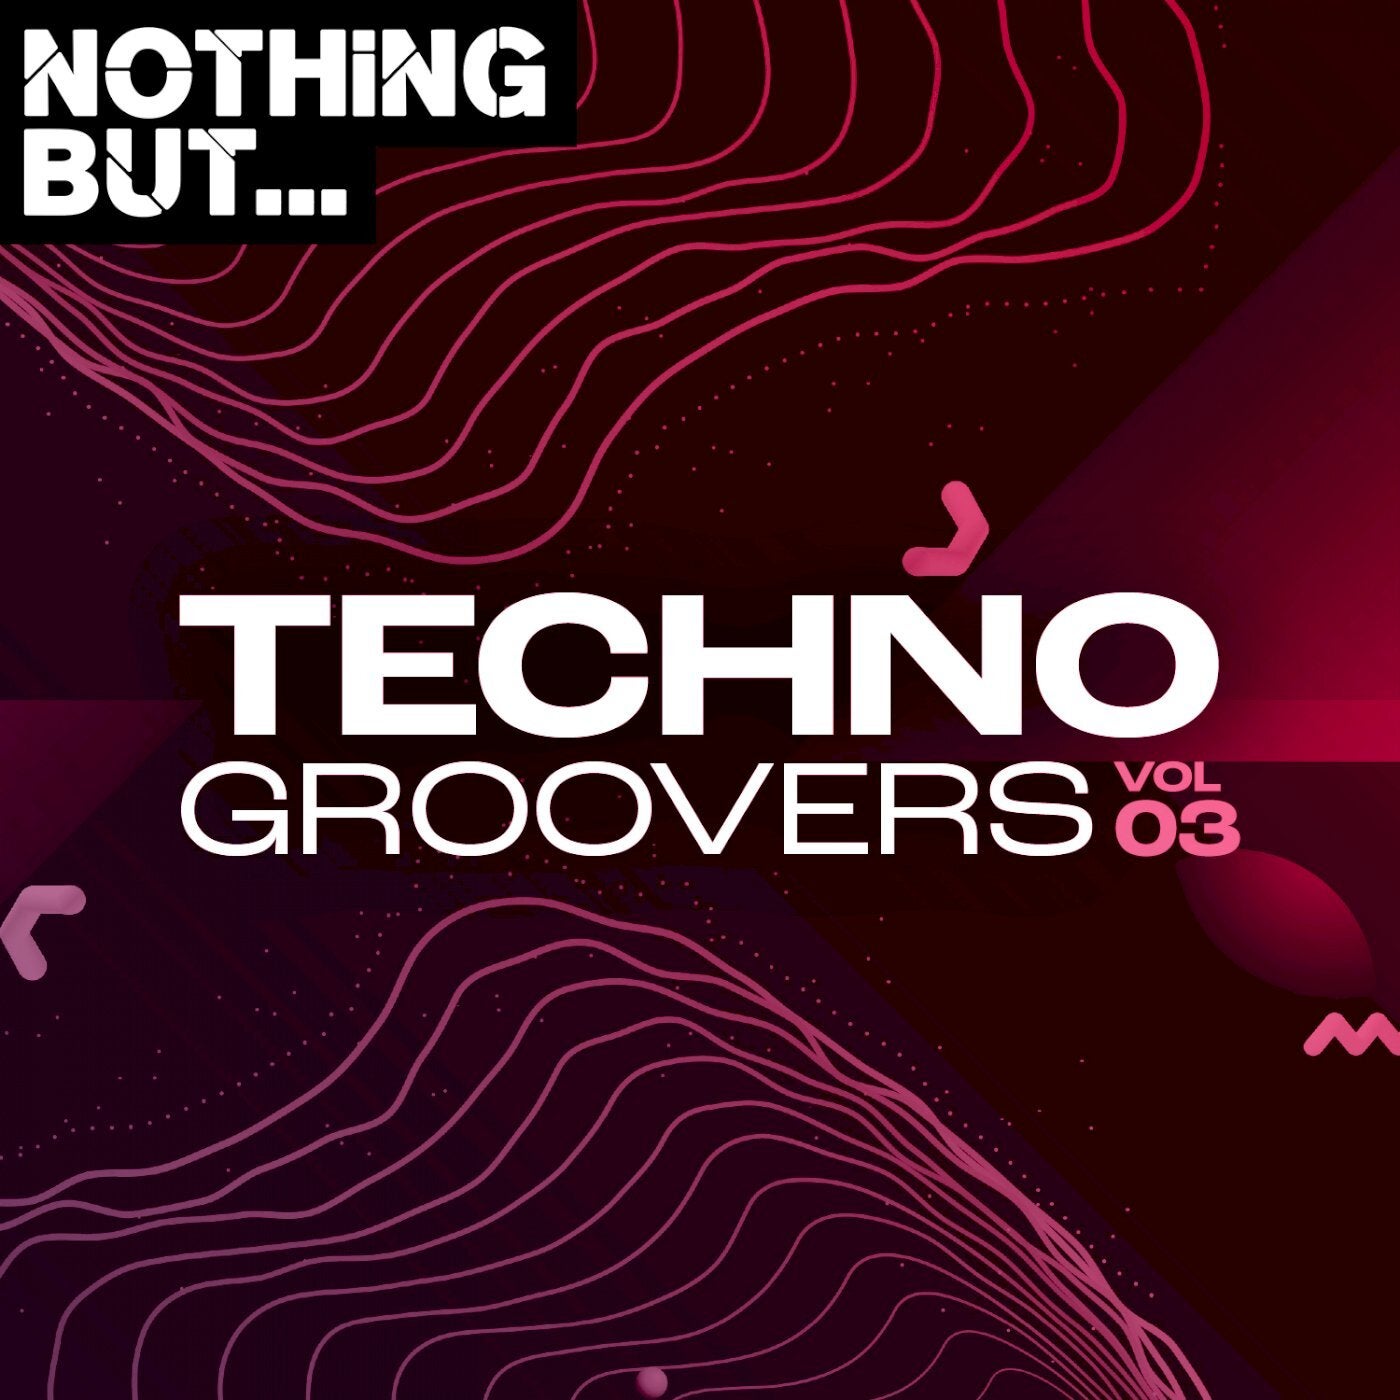 Andreja Zelich, Arcane 15 - Nothing But... Techno Groovers, Vol. 03 [Nothing But]